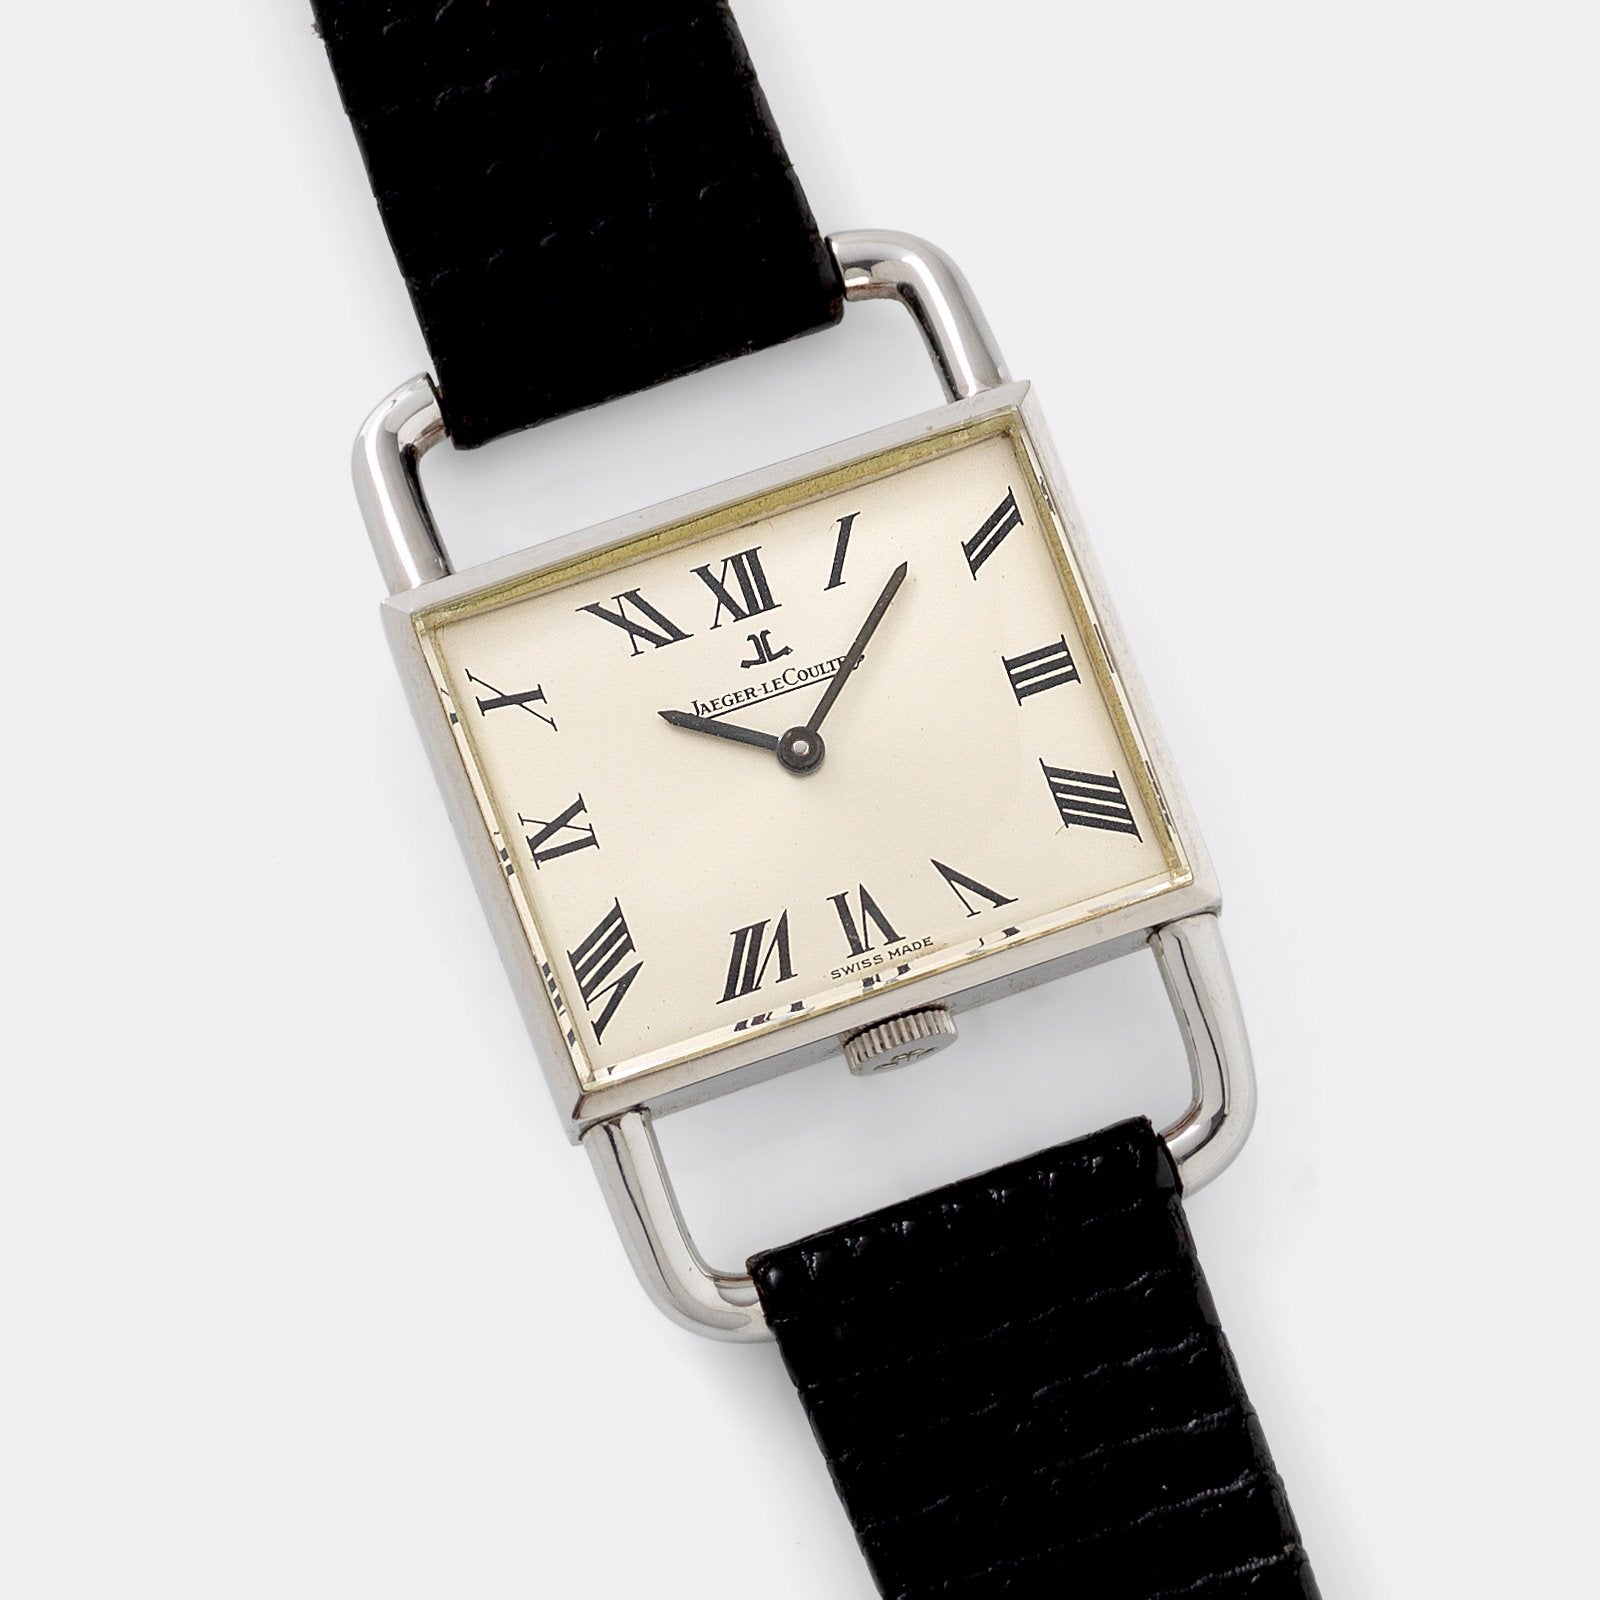 Jaeger LeCoultre Etrier Large Size Reference 9041.42